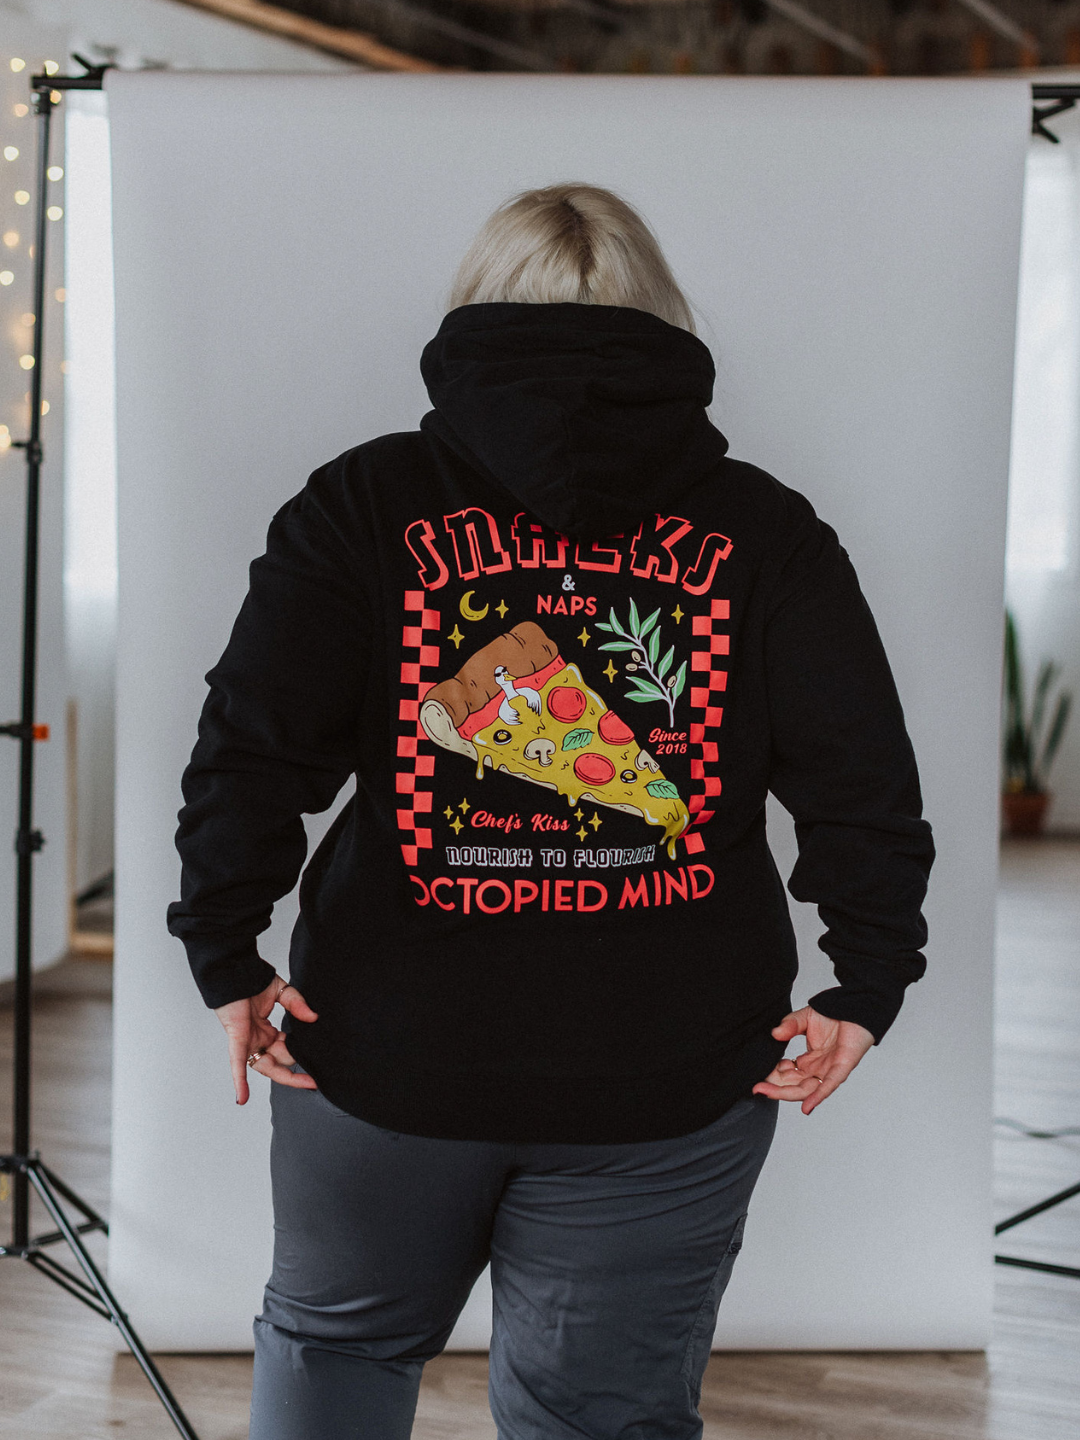 Snacks and Naps Hoodie - Octopied Mind